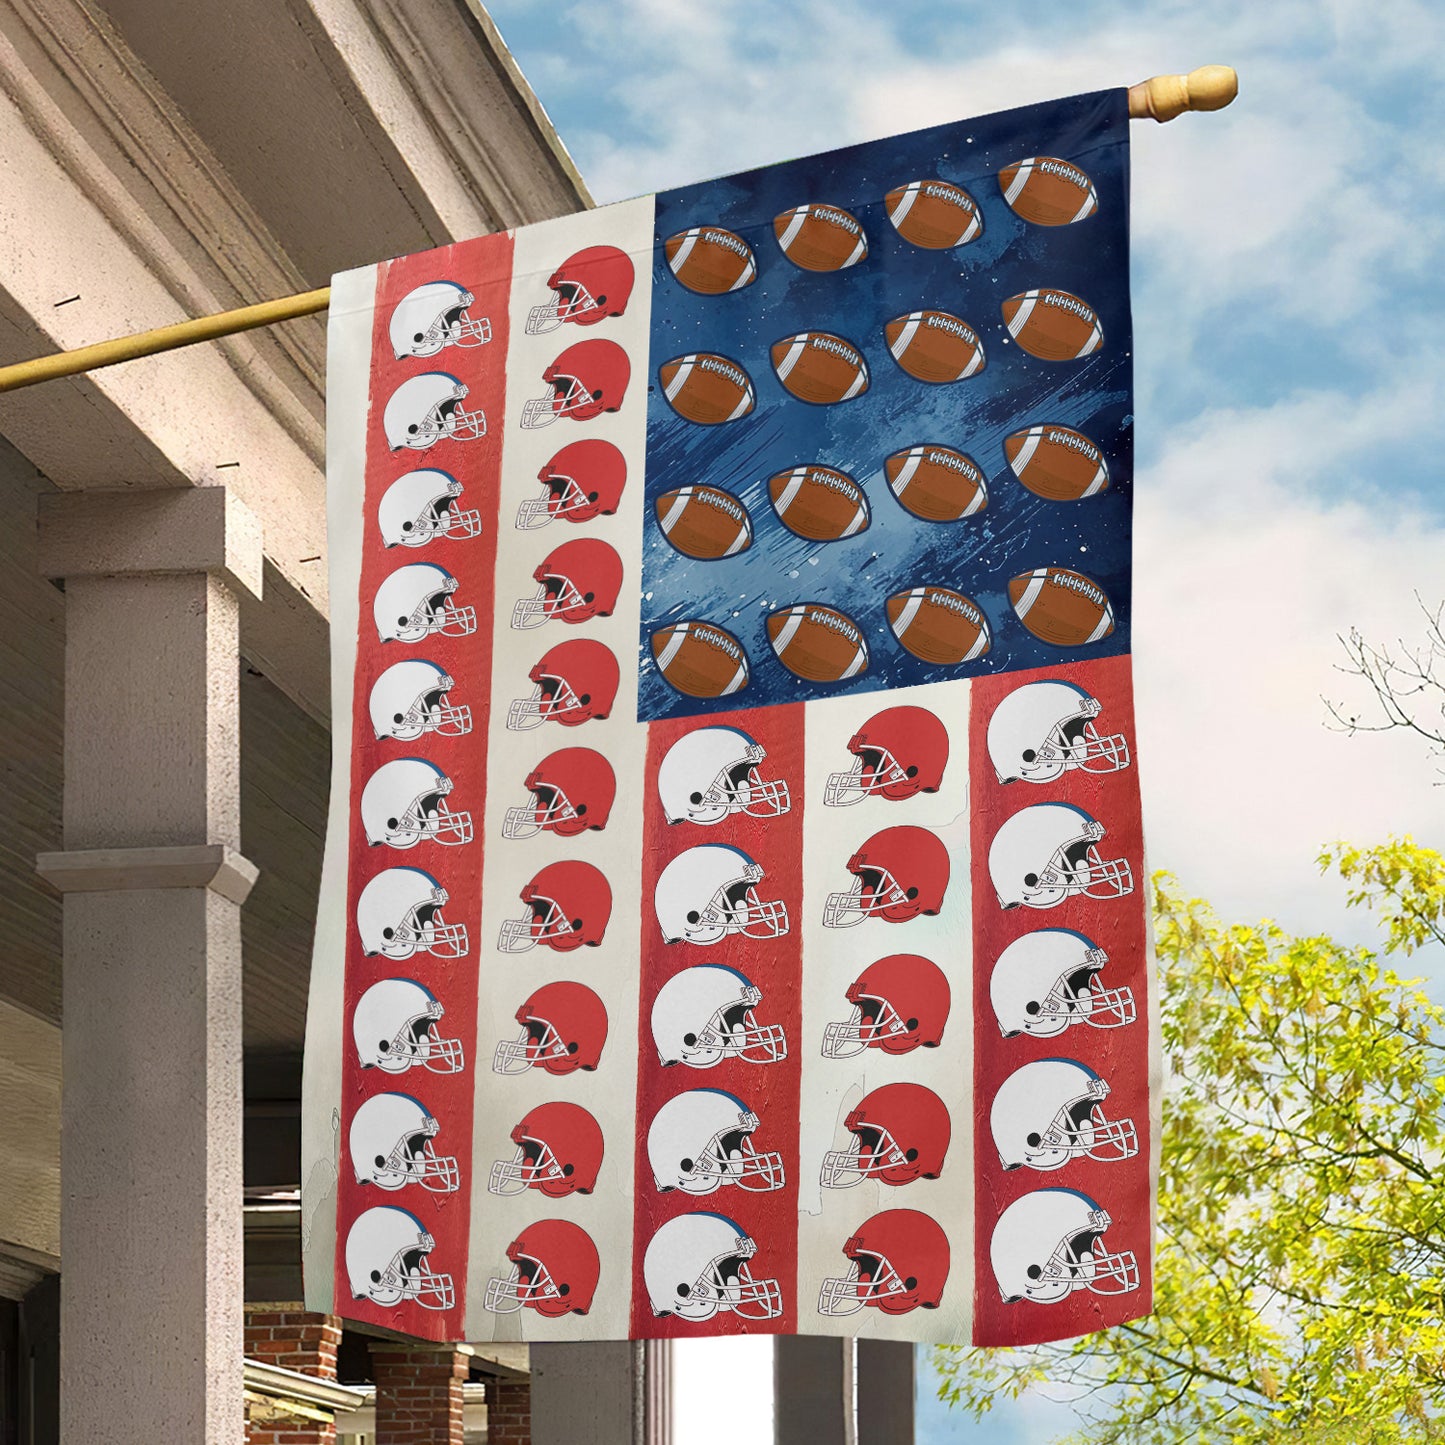 July 4th Football Garden Flag House Flag my Favorite Independence Day Yard Flag Gift For Football Lovers, Football Players